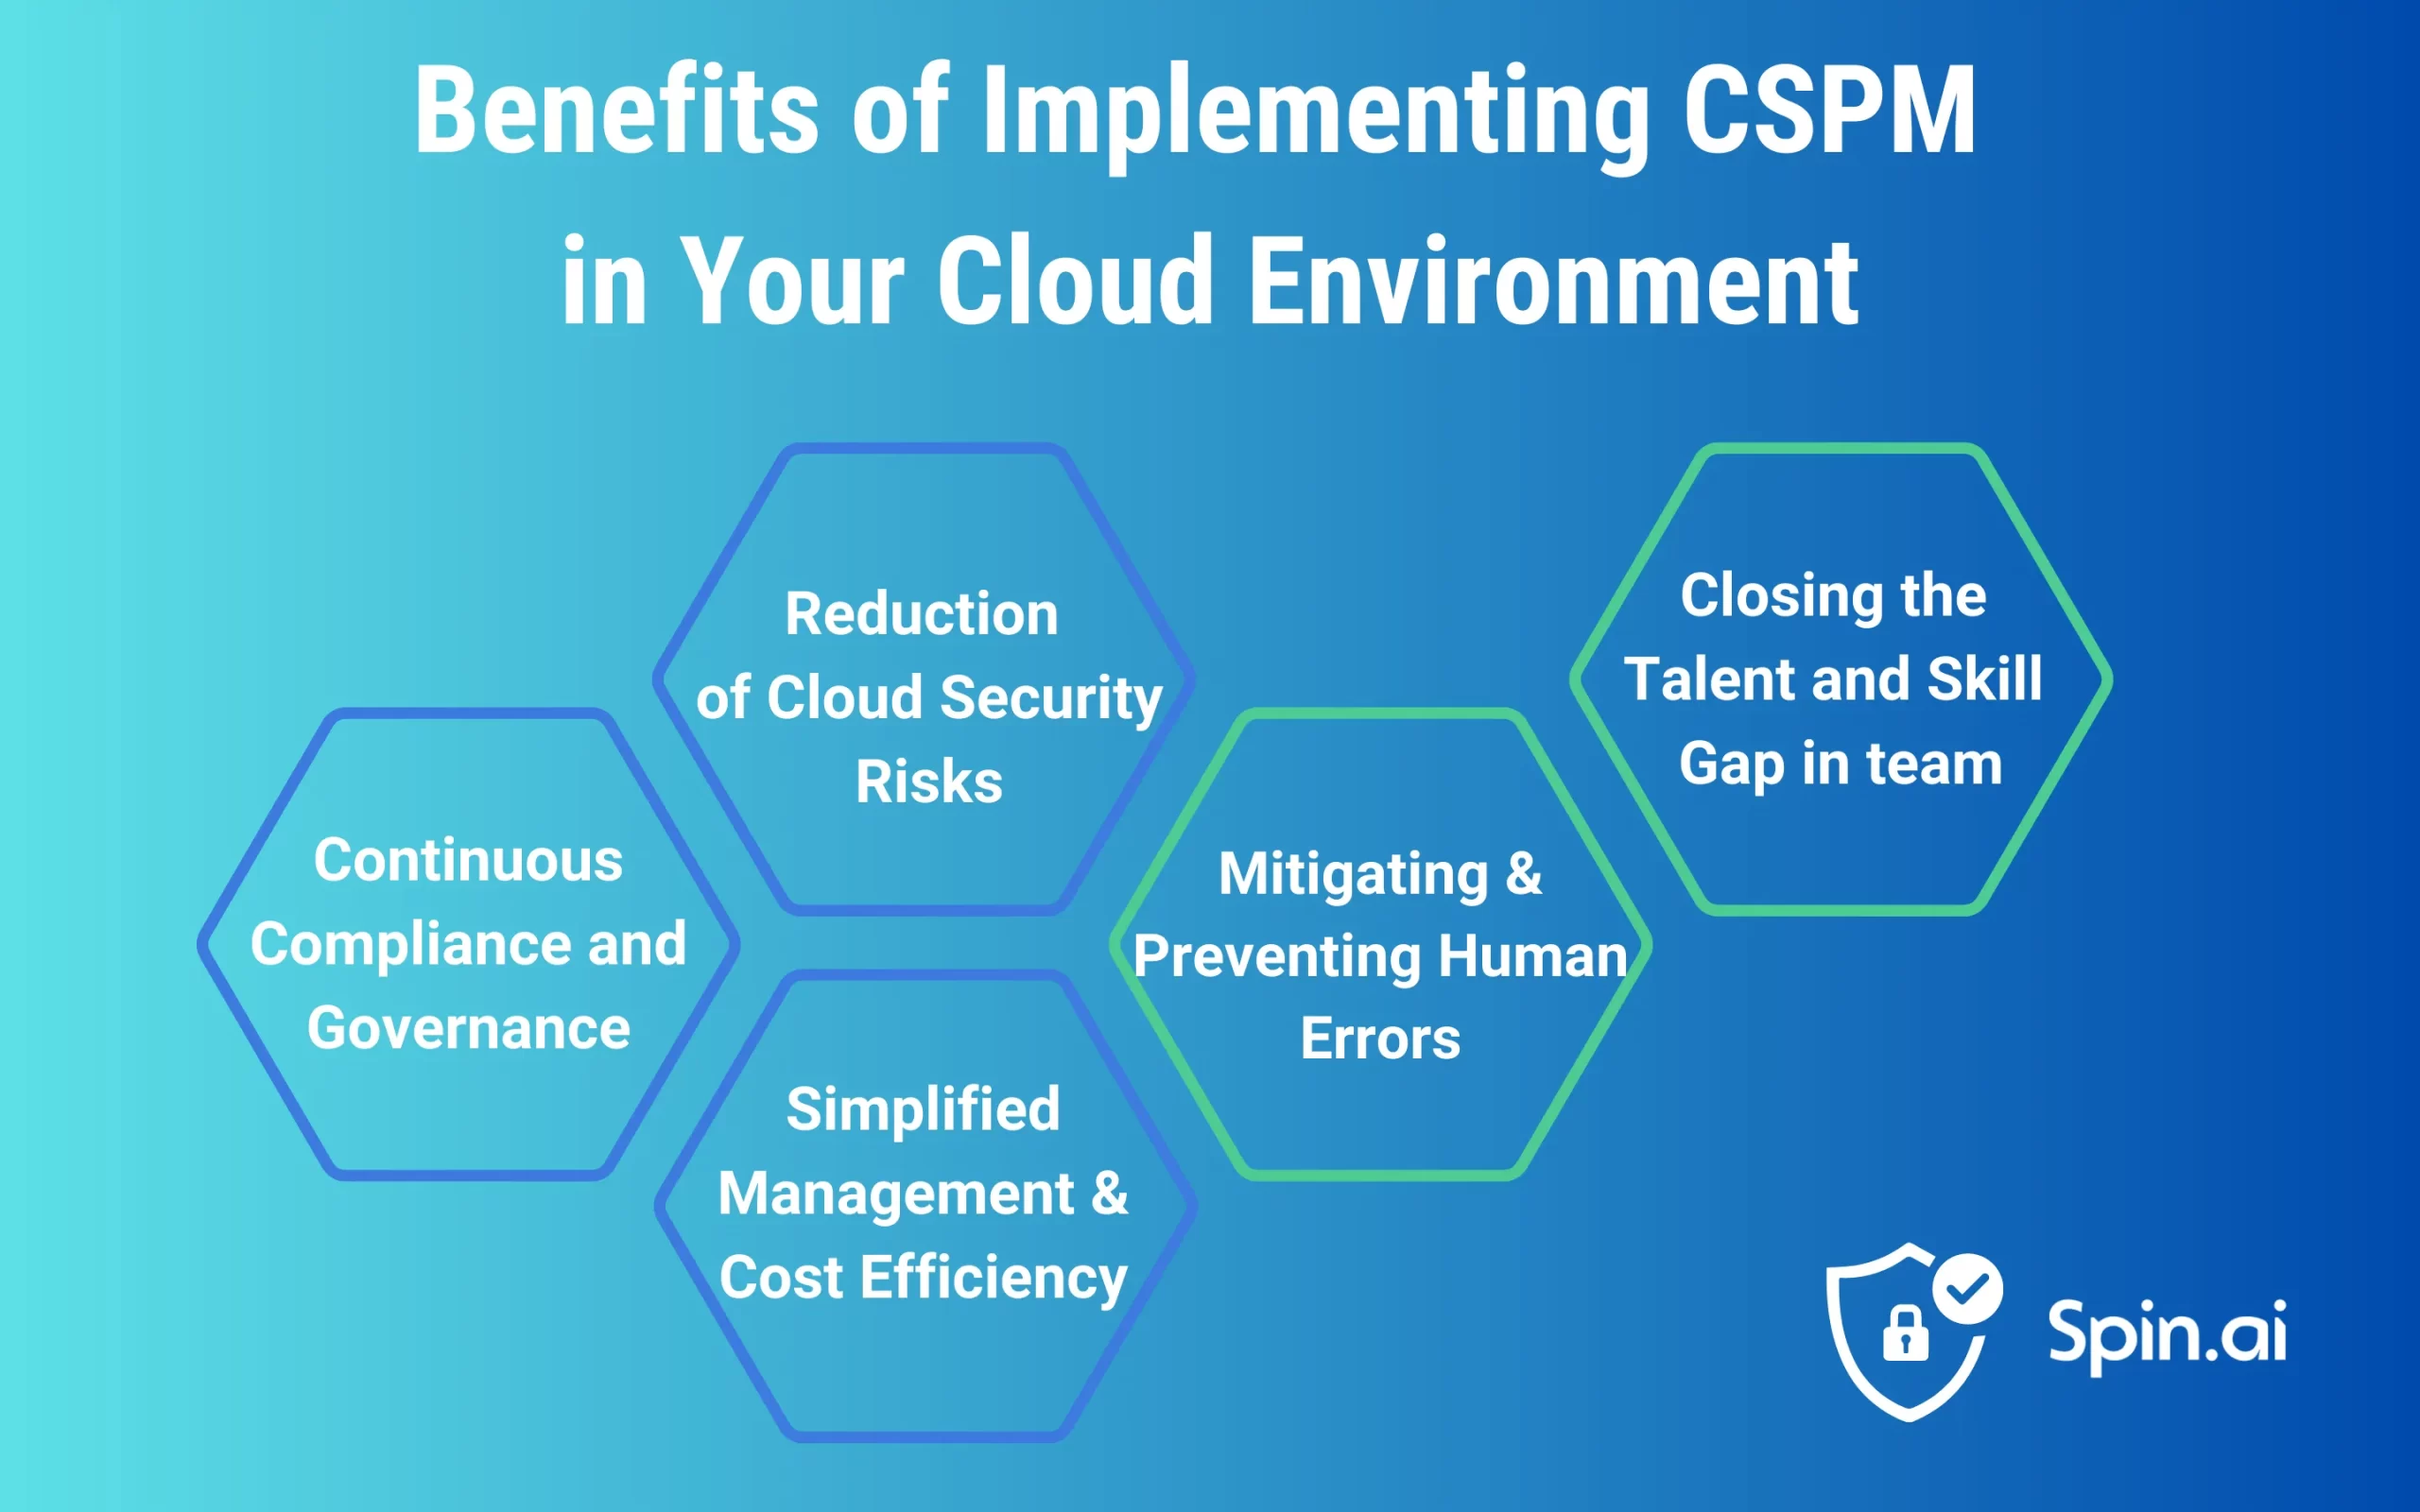 Benefits of Implementing CSPM in Your Cloud Environment